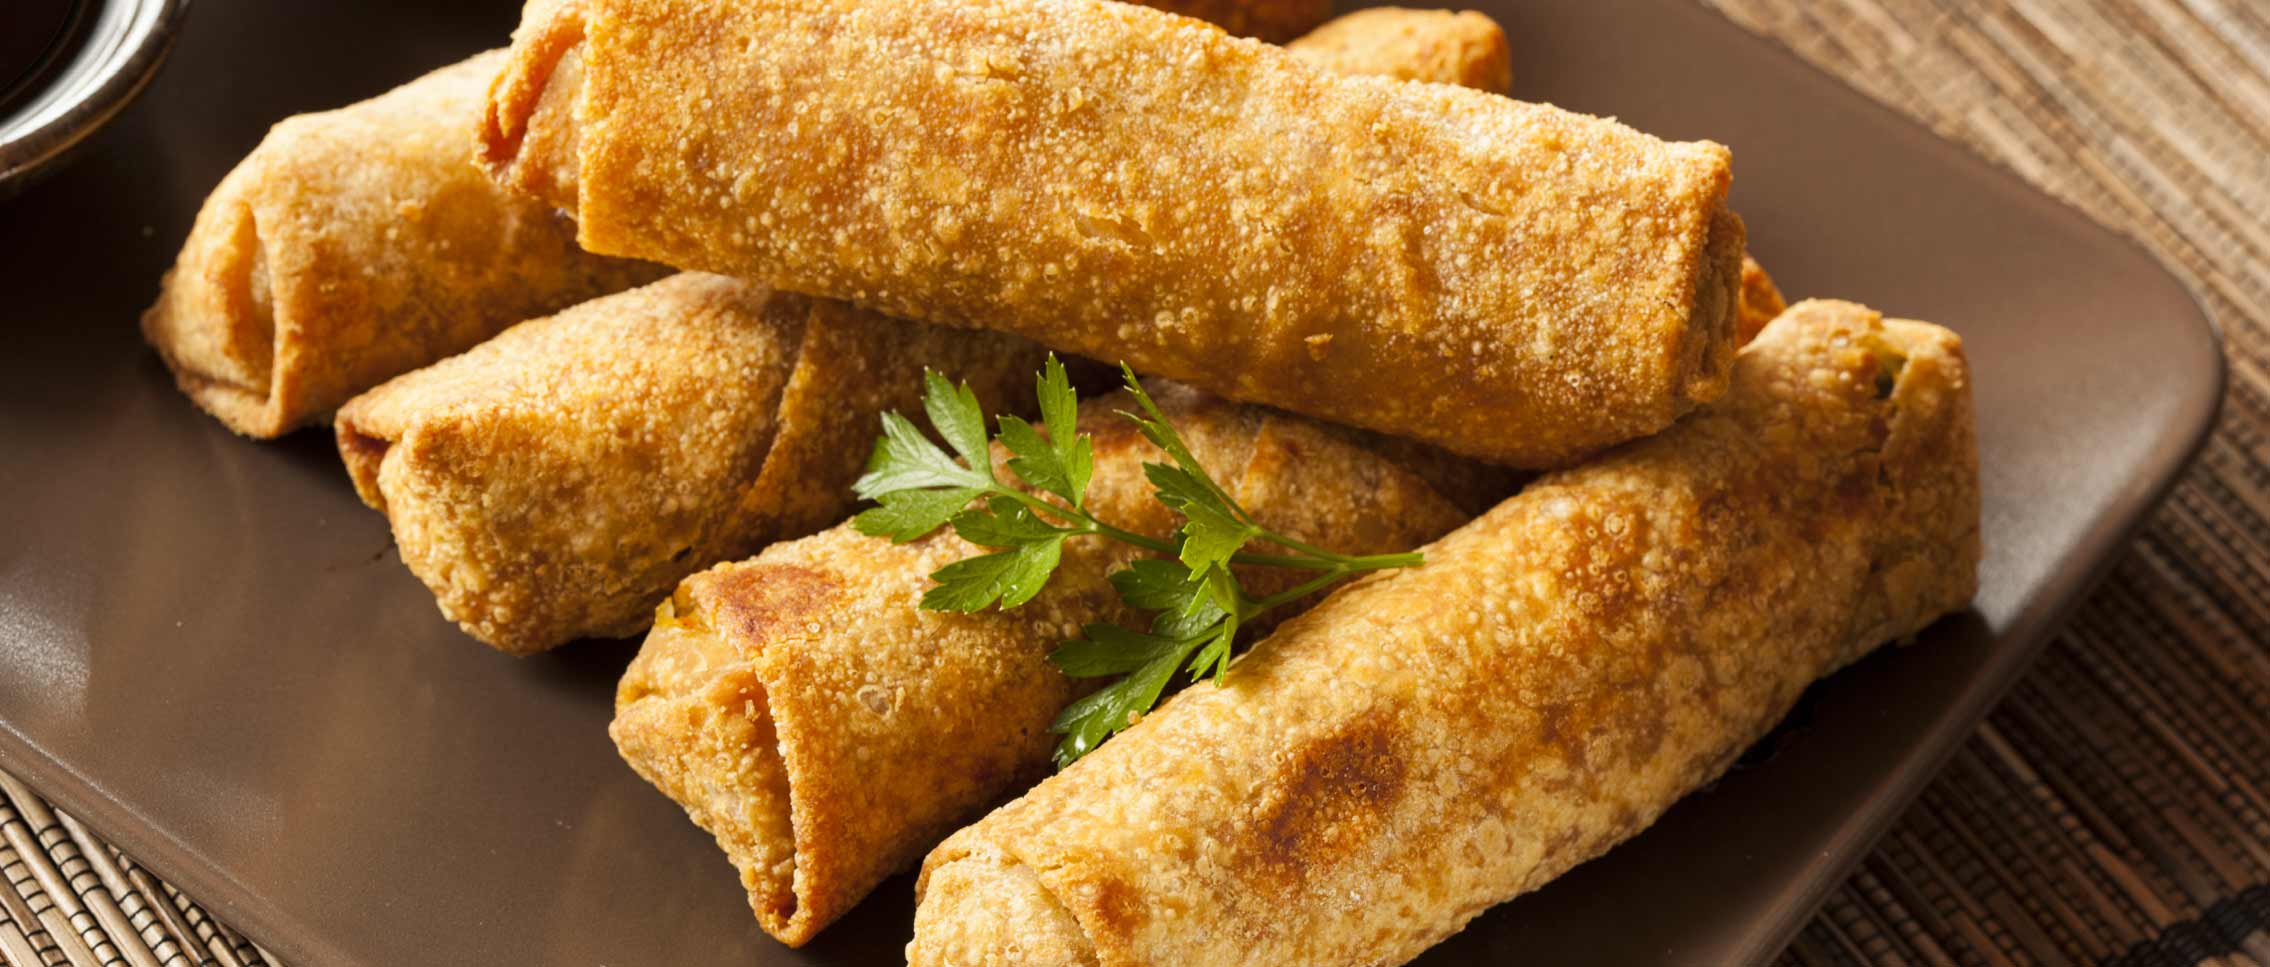 Avacado Eggrolls Without Dining Out